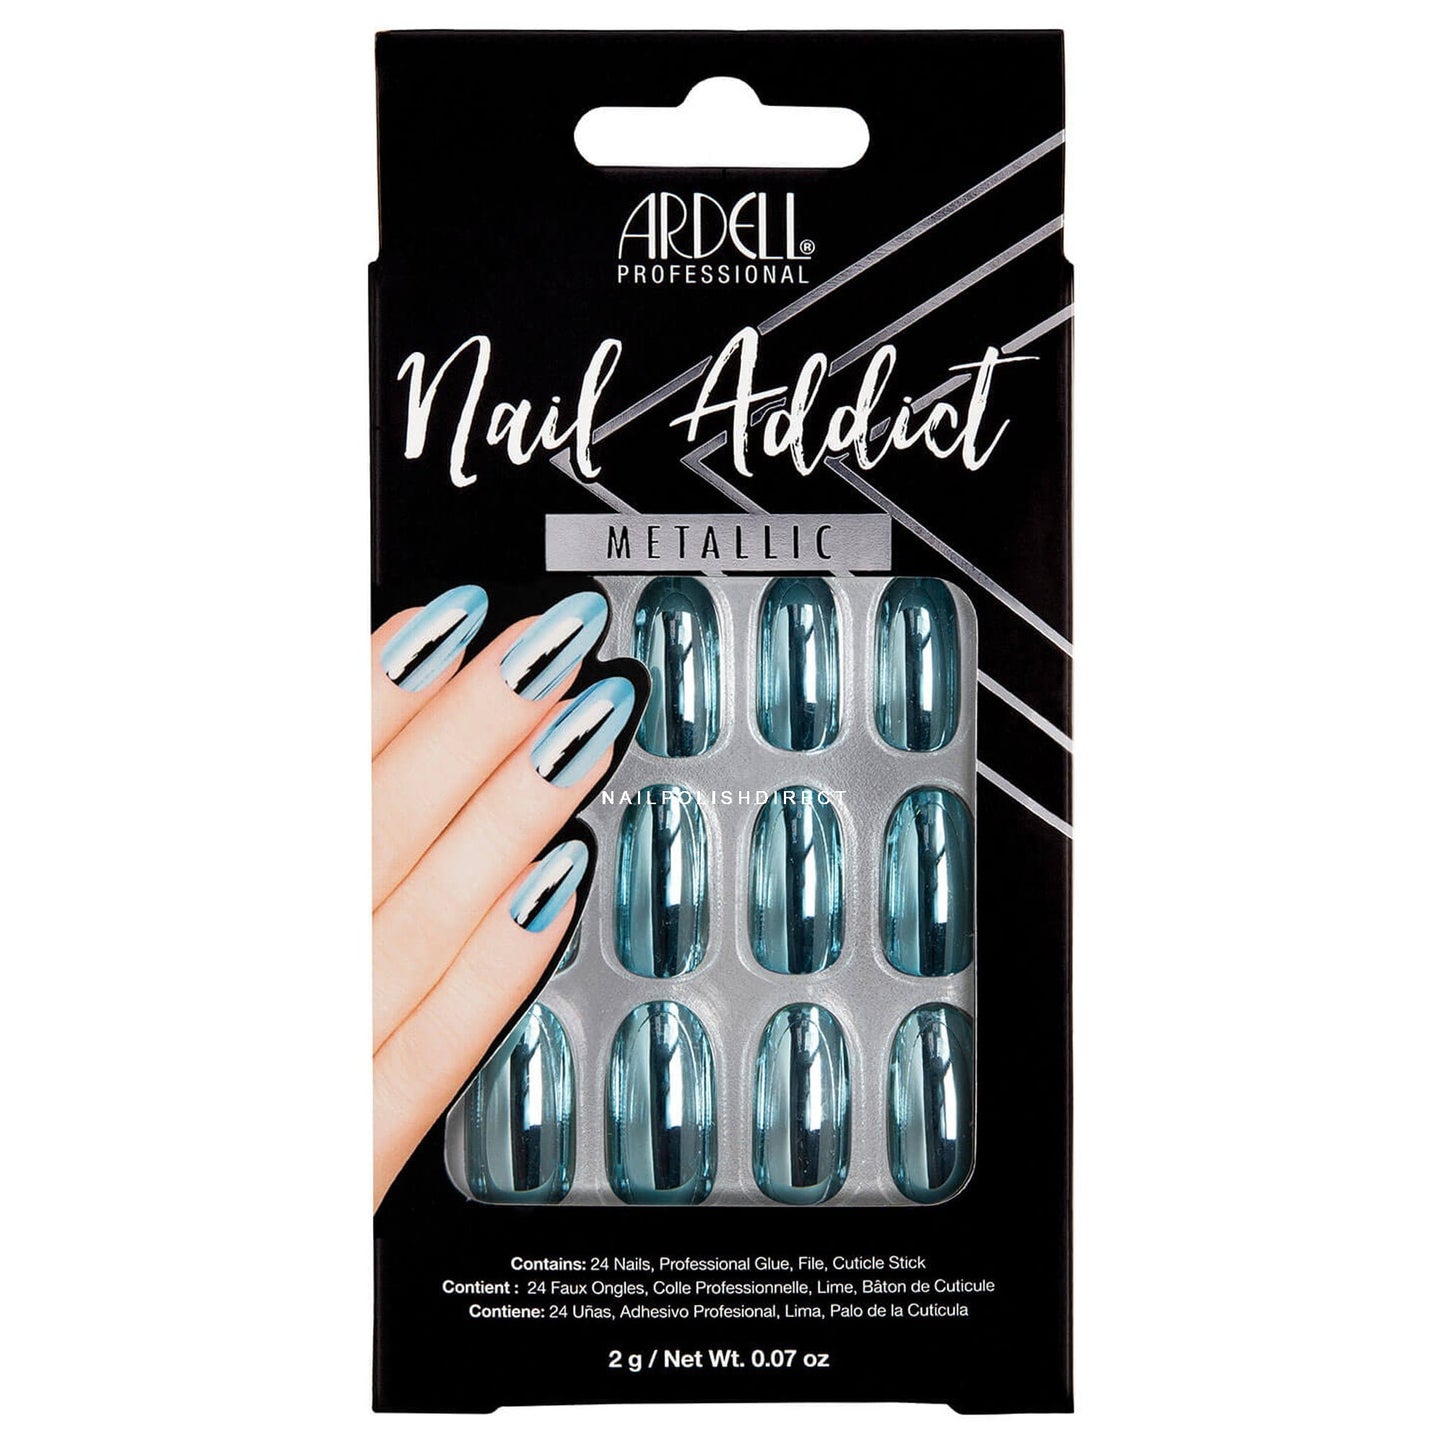 Load image into Gallery viewer, Ardell Nail Addict Metallic False Nails - Metallic Blue (24 Nails)
